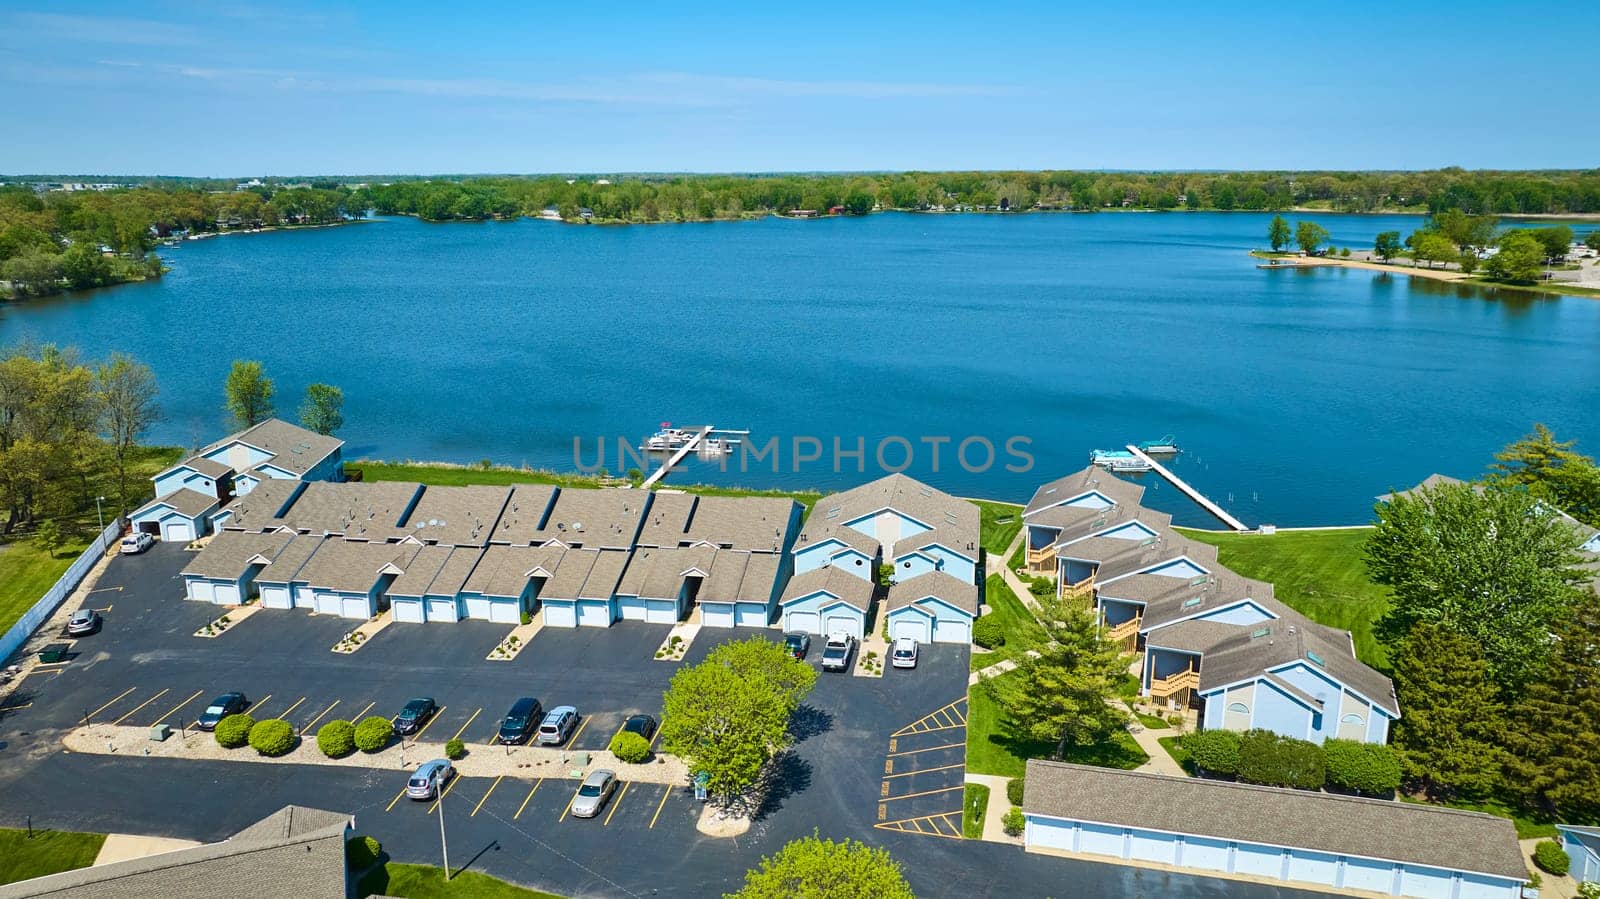 Aerial view of a peaceful lakeside community in Warsaw, Indiana, showcasing neat townhouses and recreational boating.